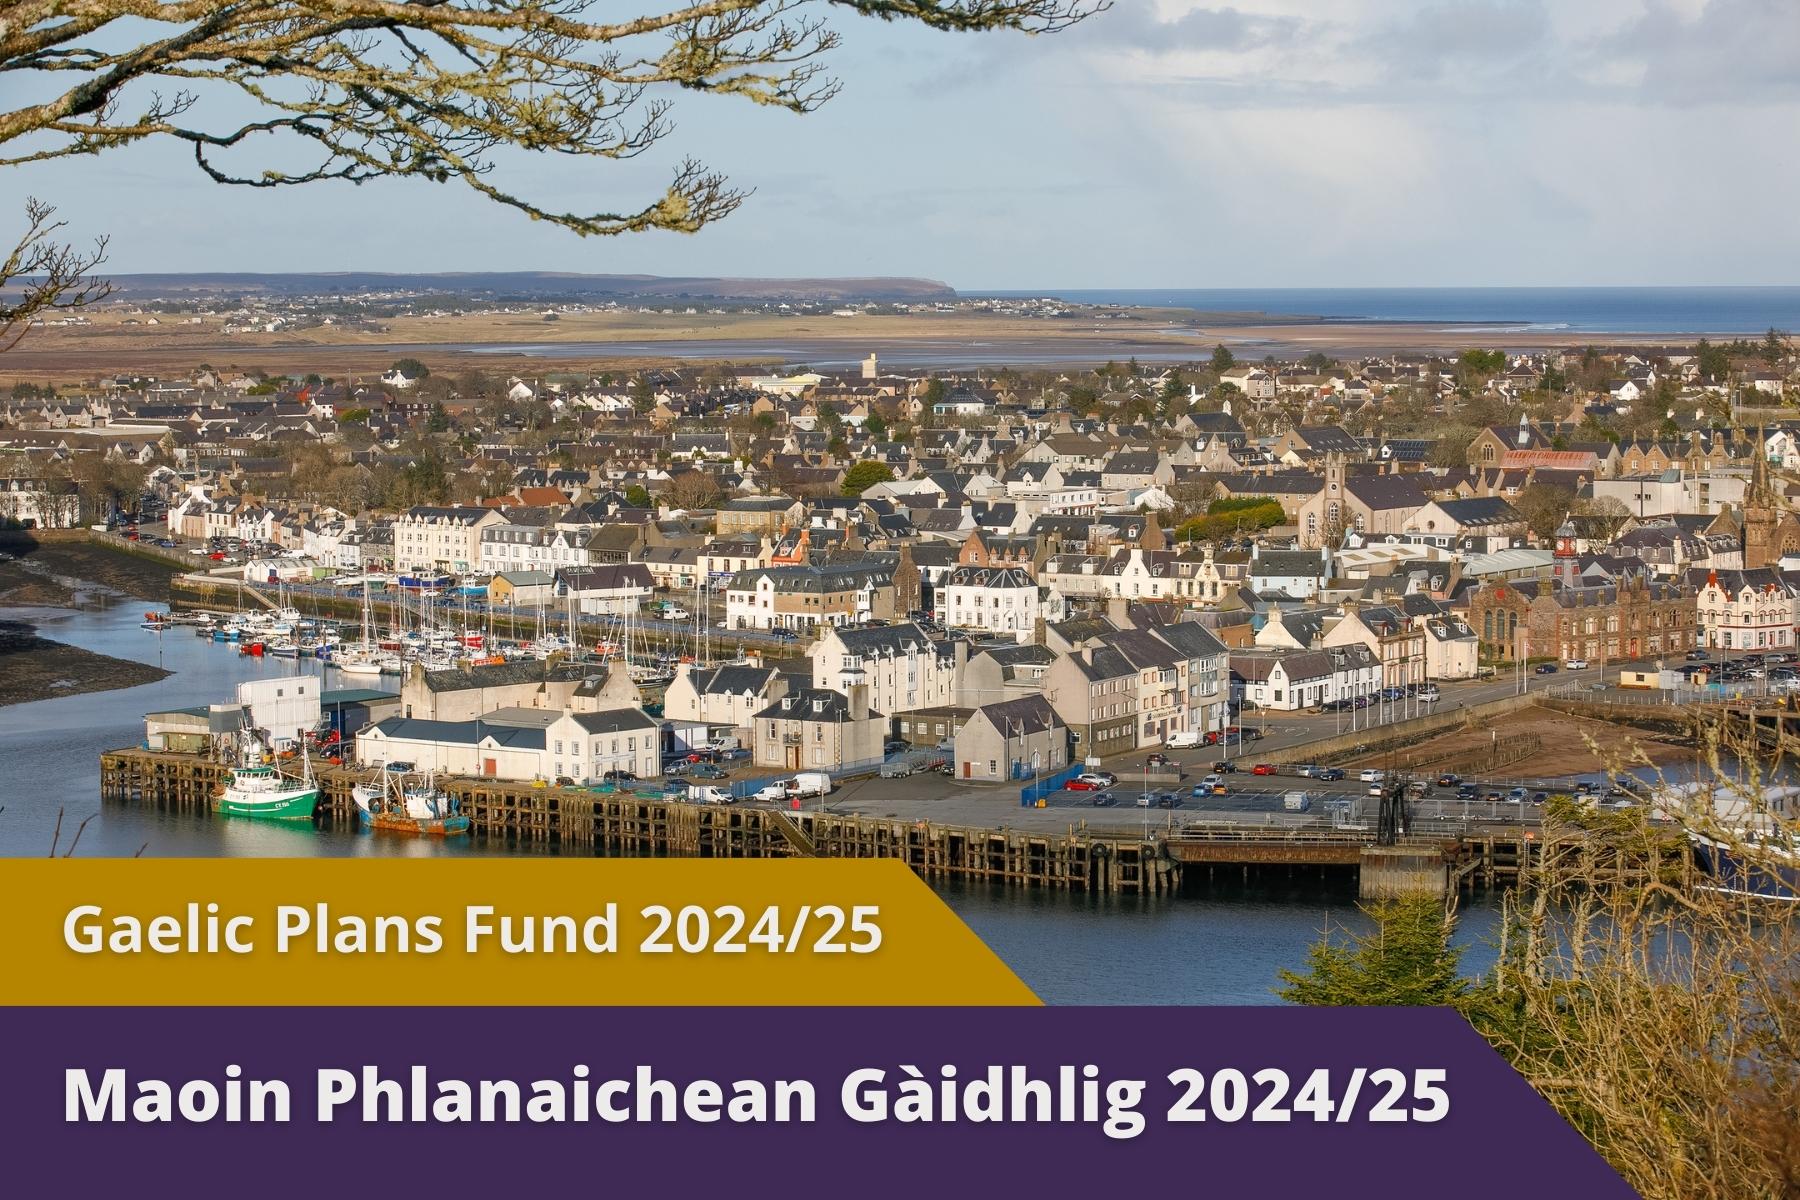 Gaelic Plans Fund Opens to Applications